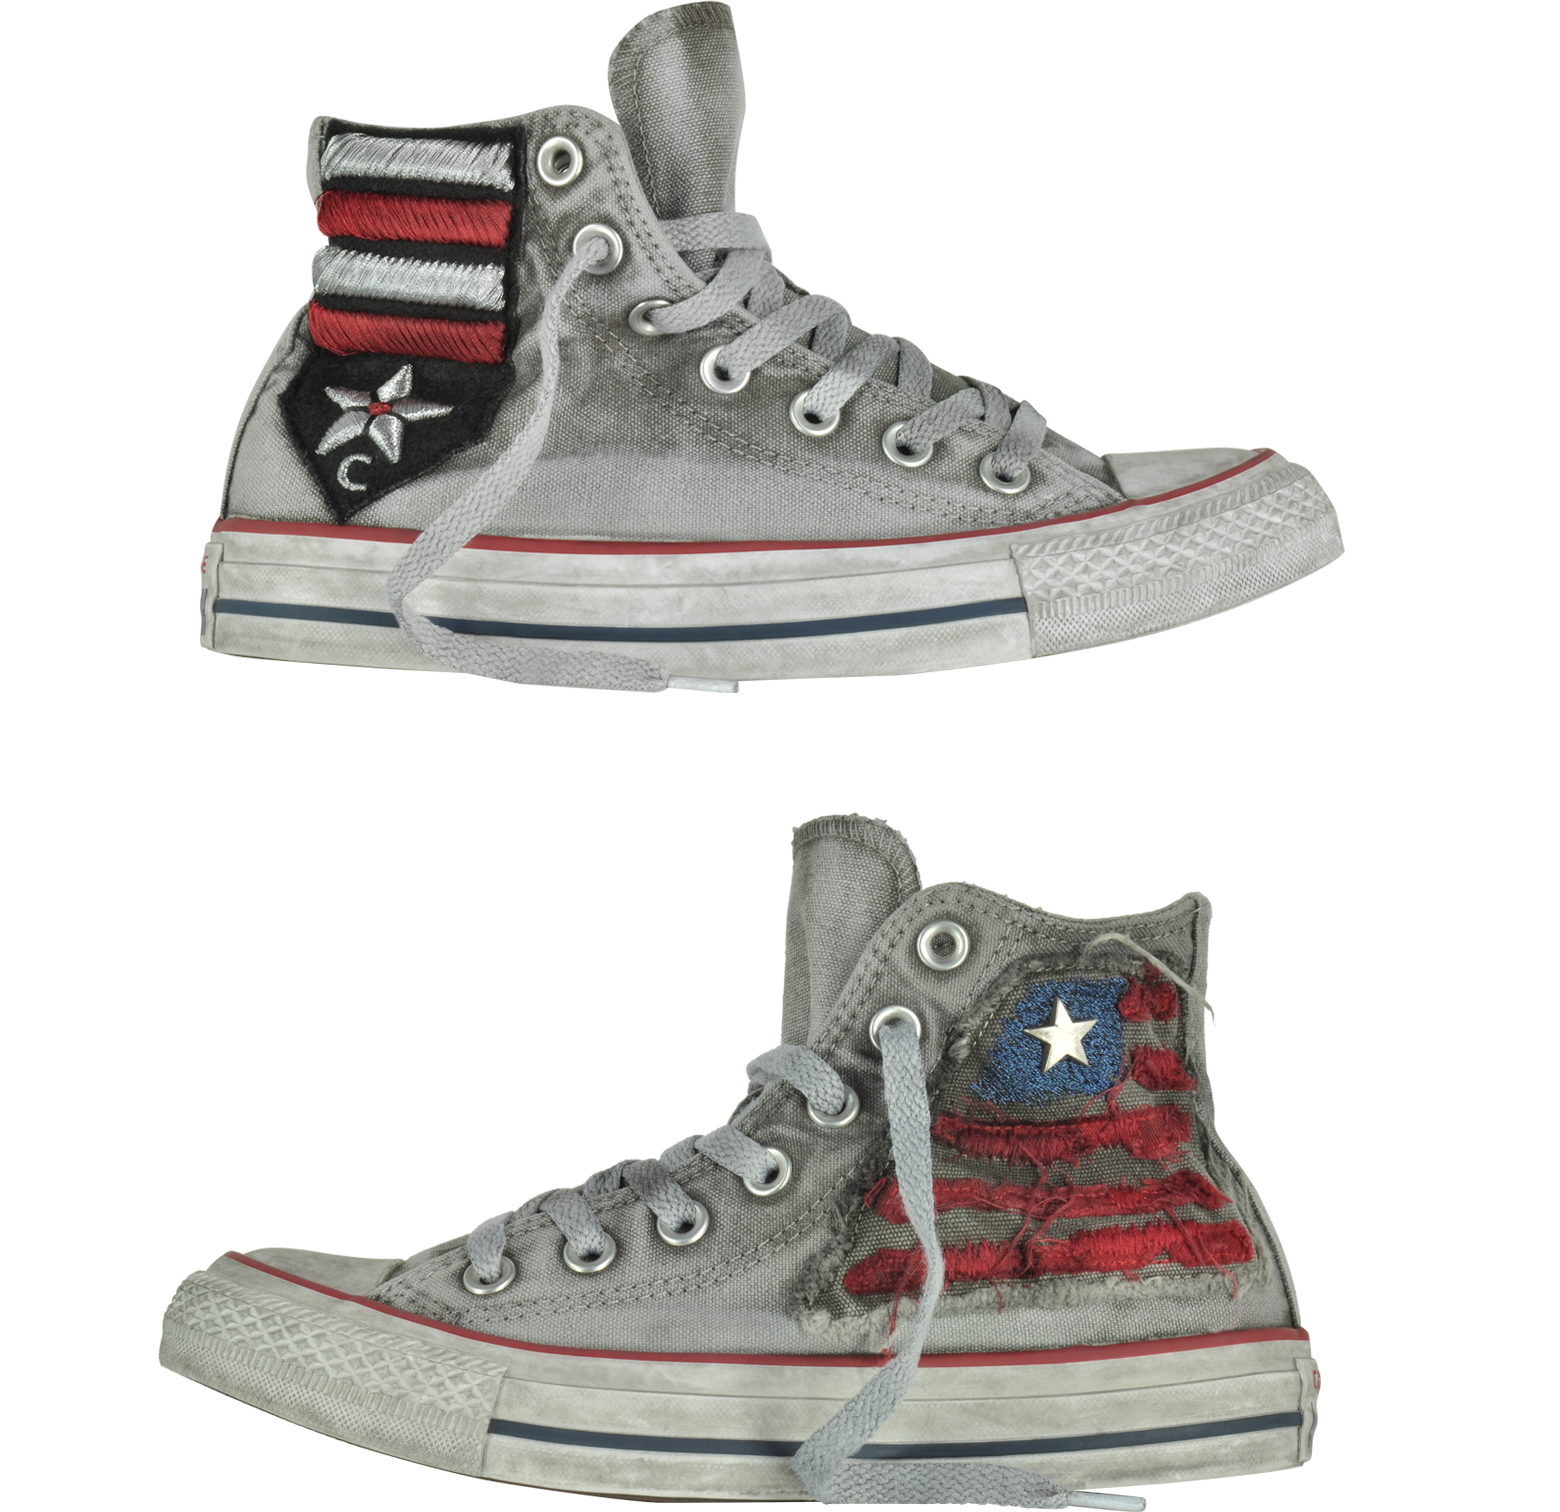 converse limited edition uk